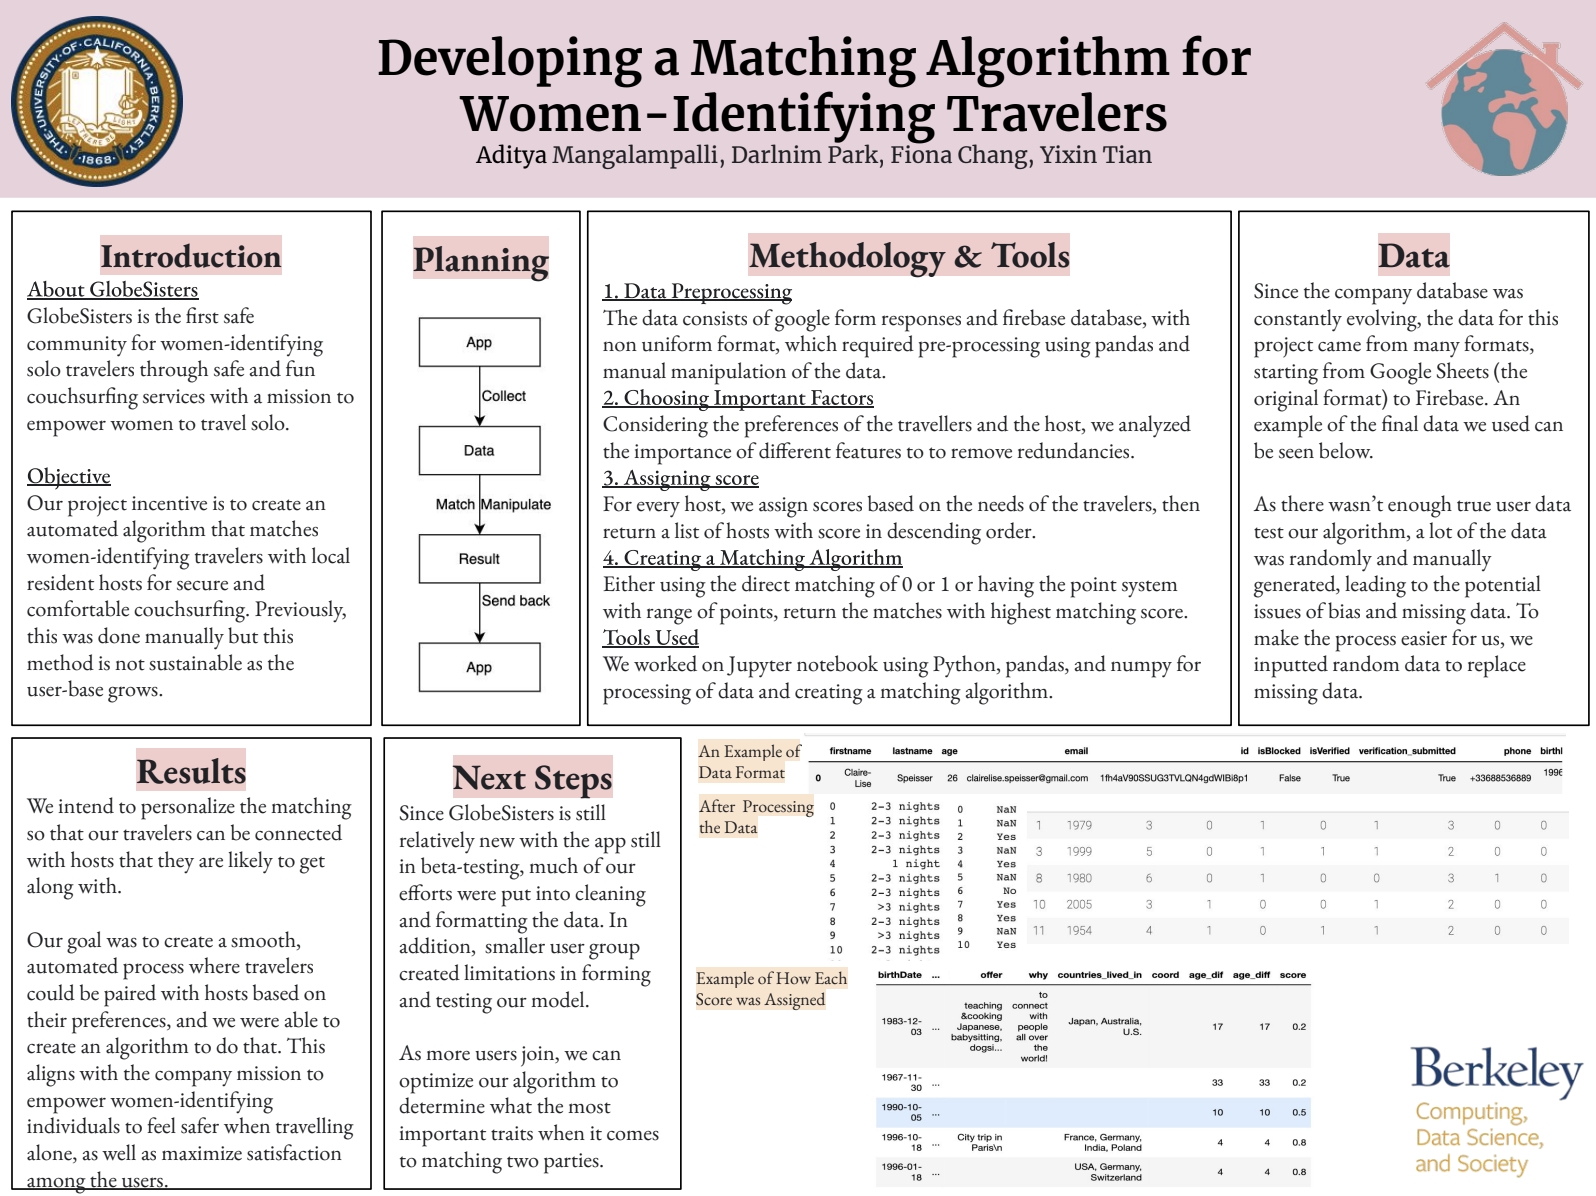 Developing a Matching Algorithm for Women-Identifying Travelers - Fall 2022 Discovery Project